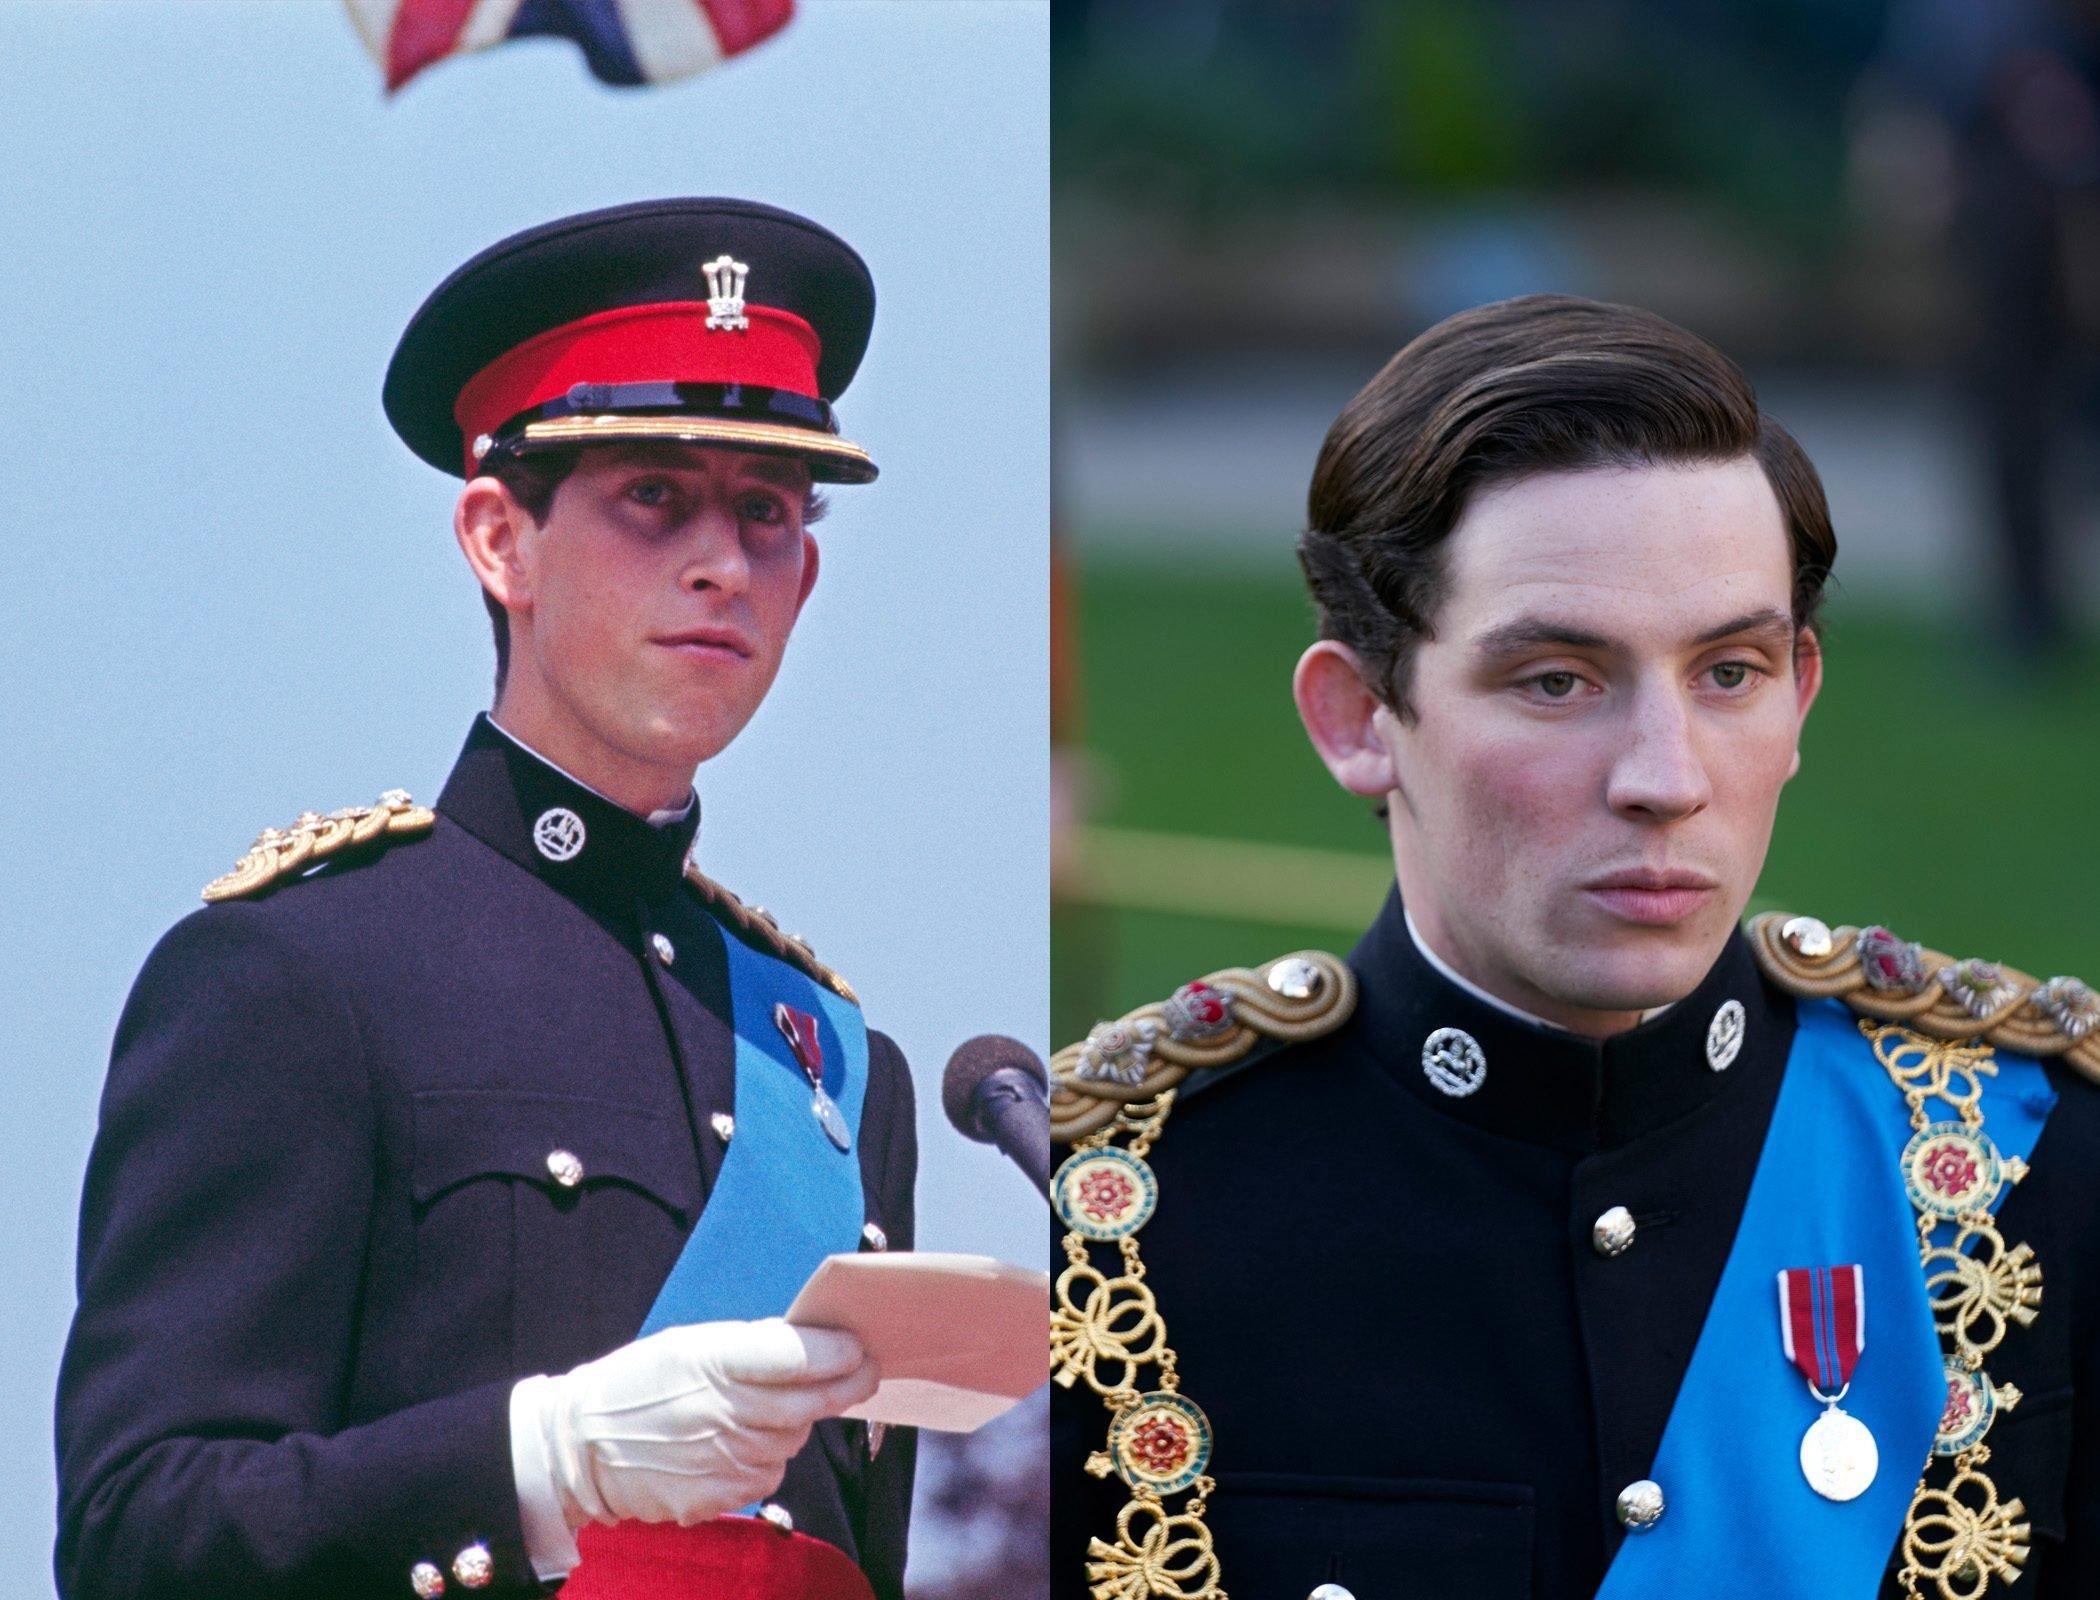 Prince Charles as a young man, as played by Josh O'Connor